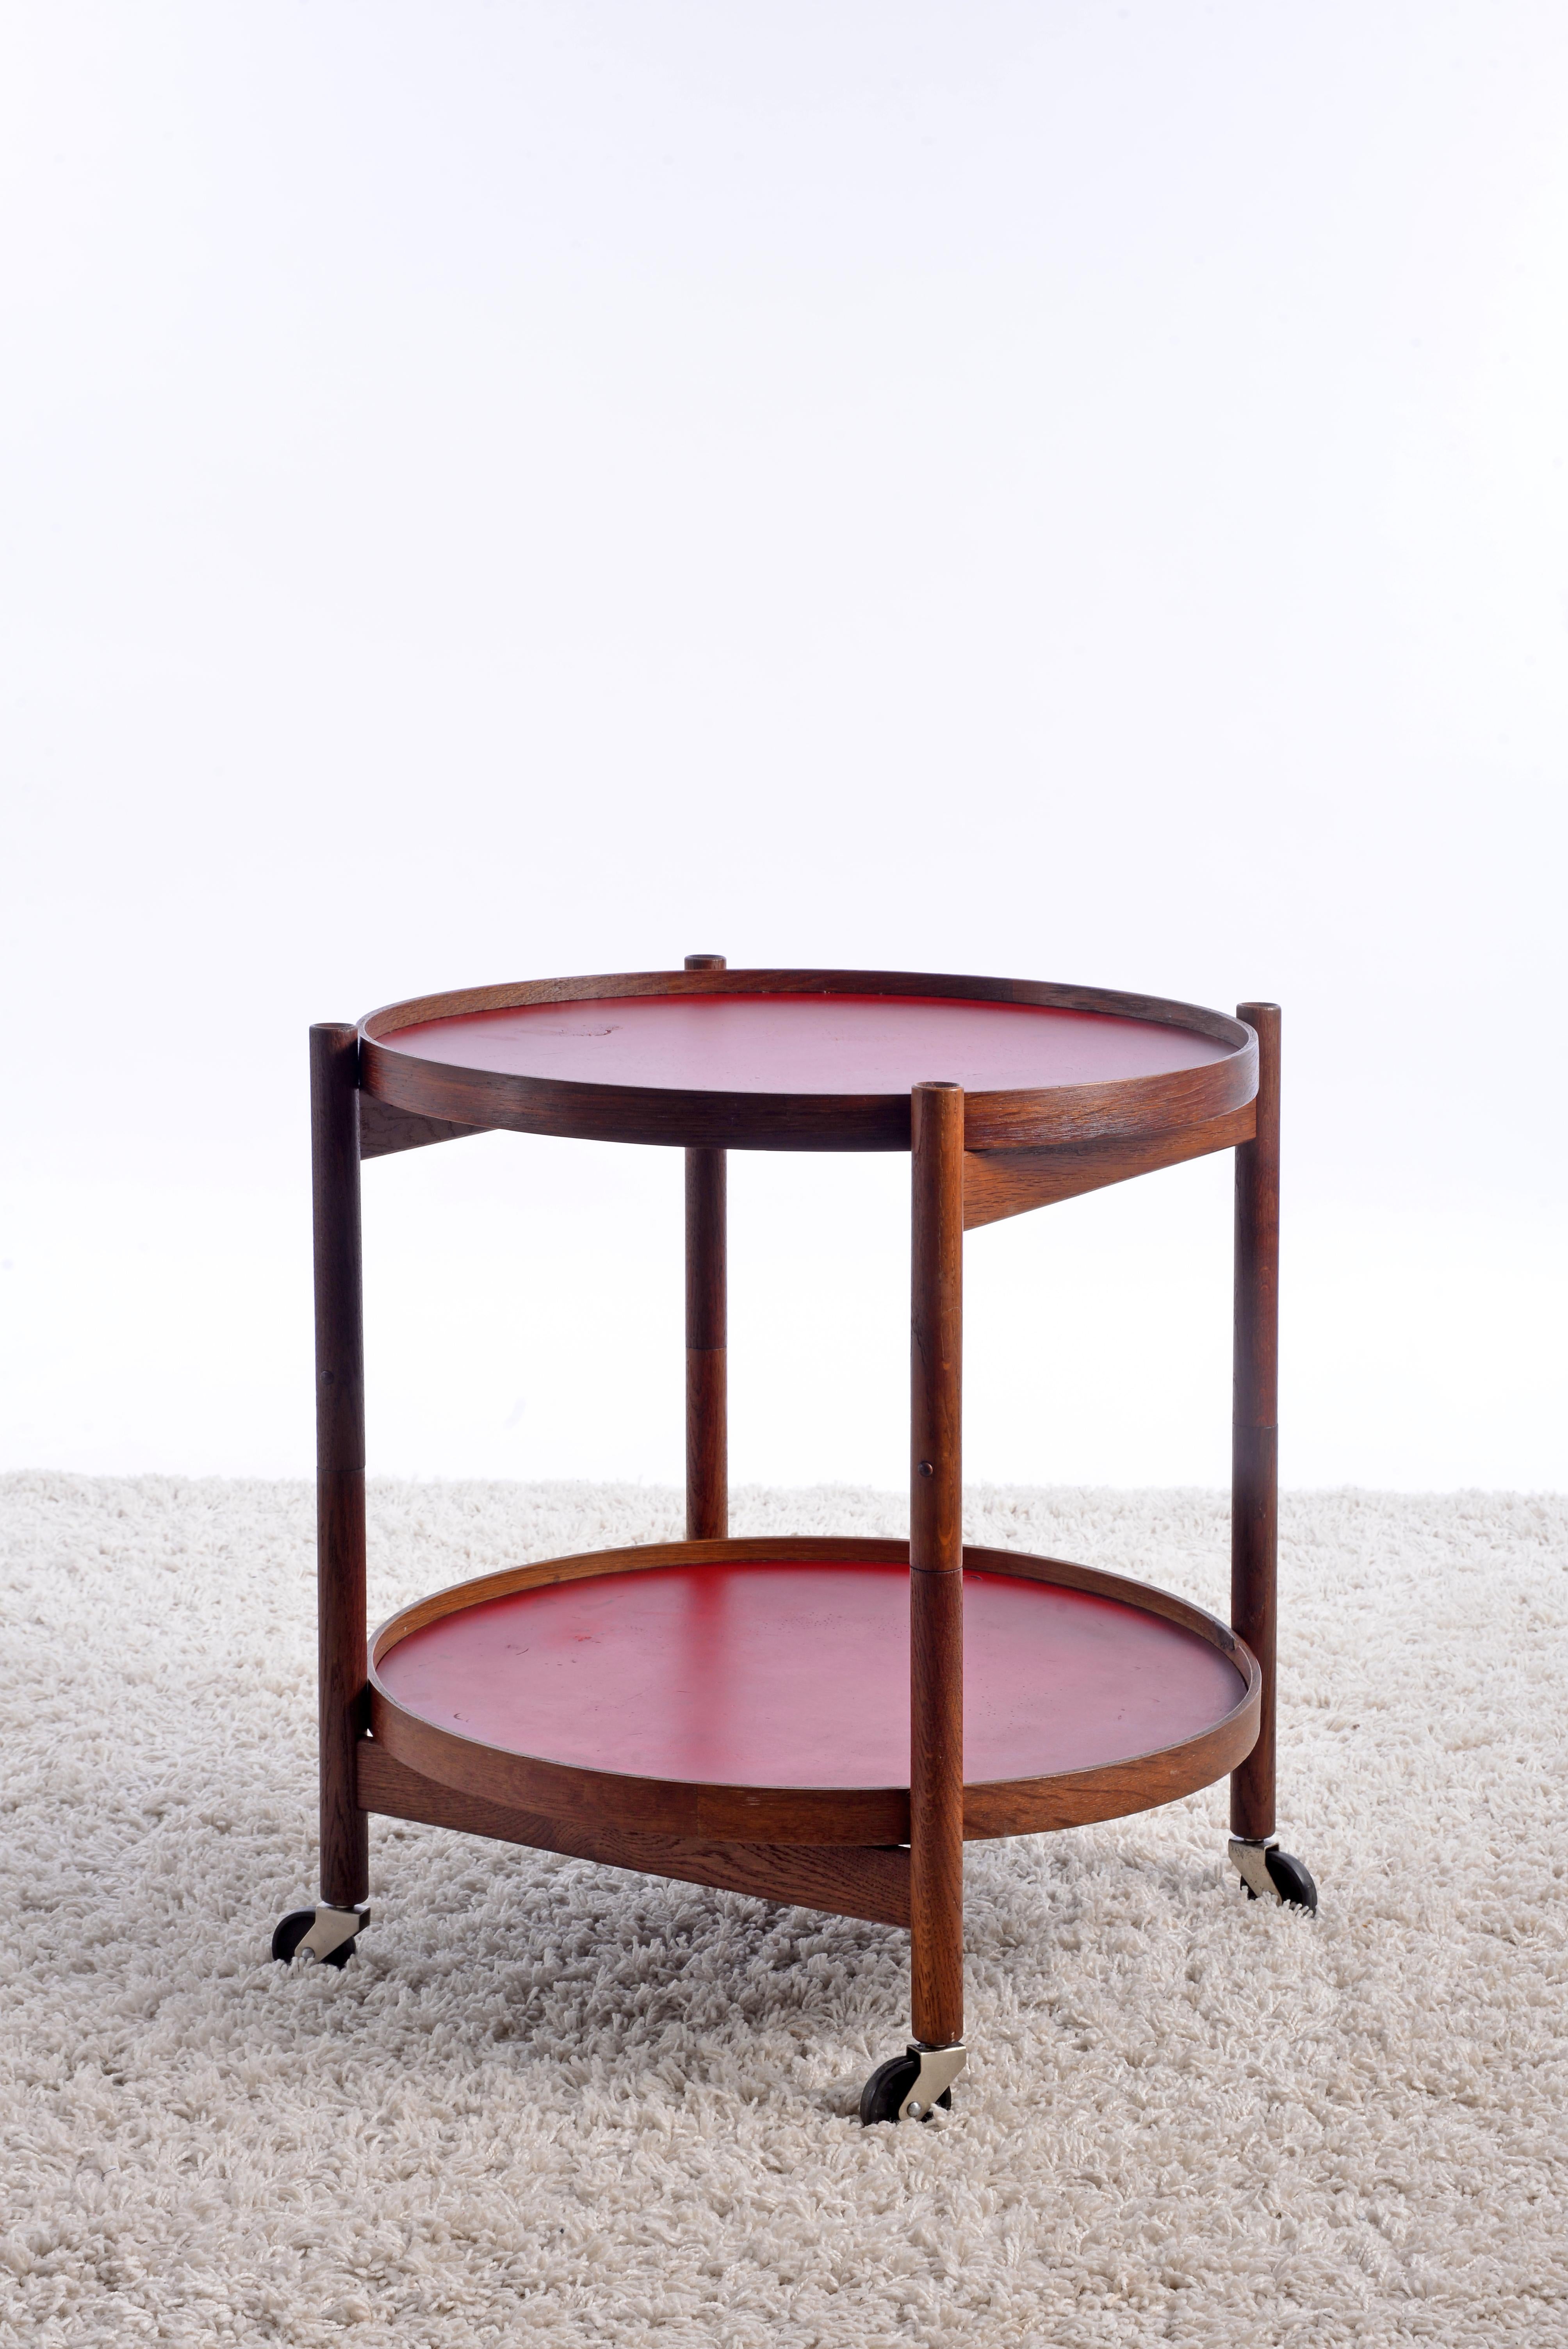 Danish Tray Table Design by Hans Bolling